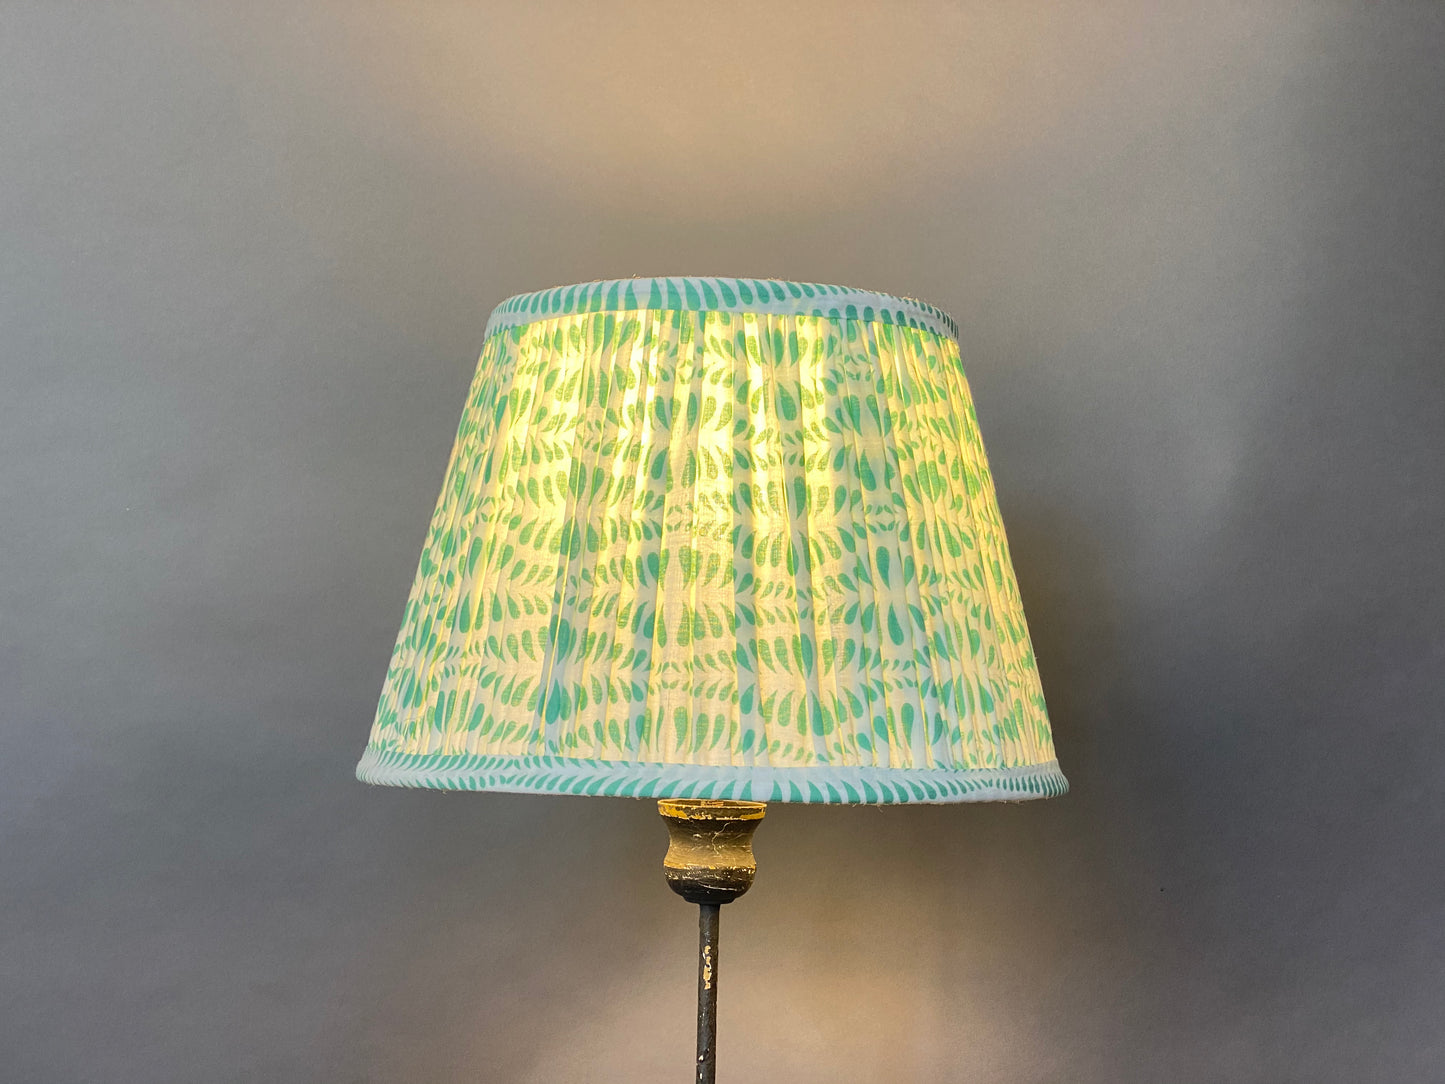 Green Bangla Cotton Lampshade shown lit on a grey background